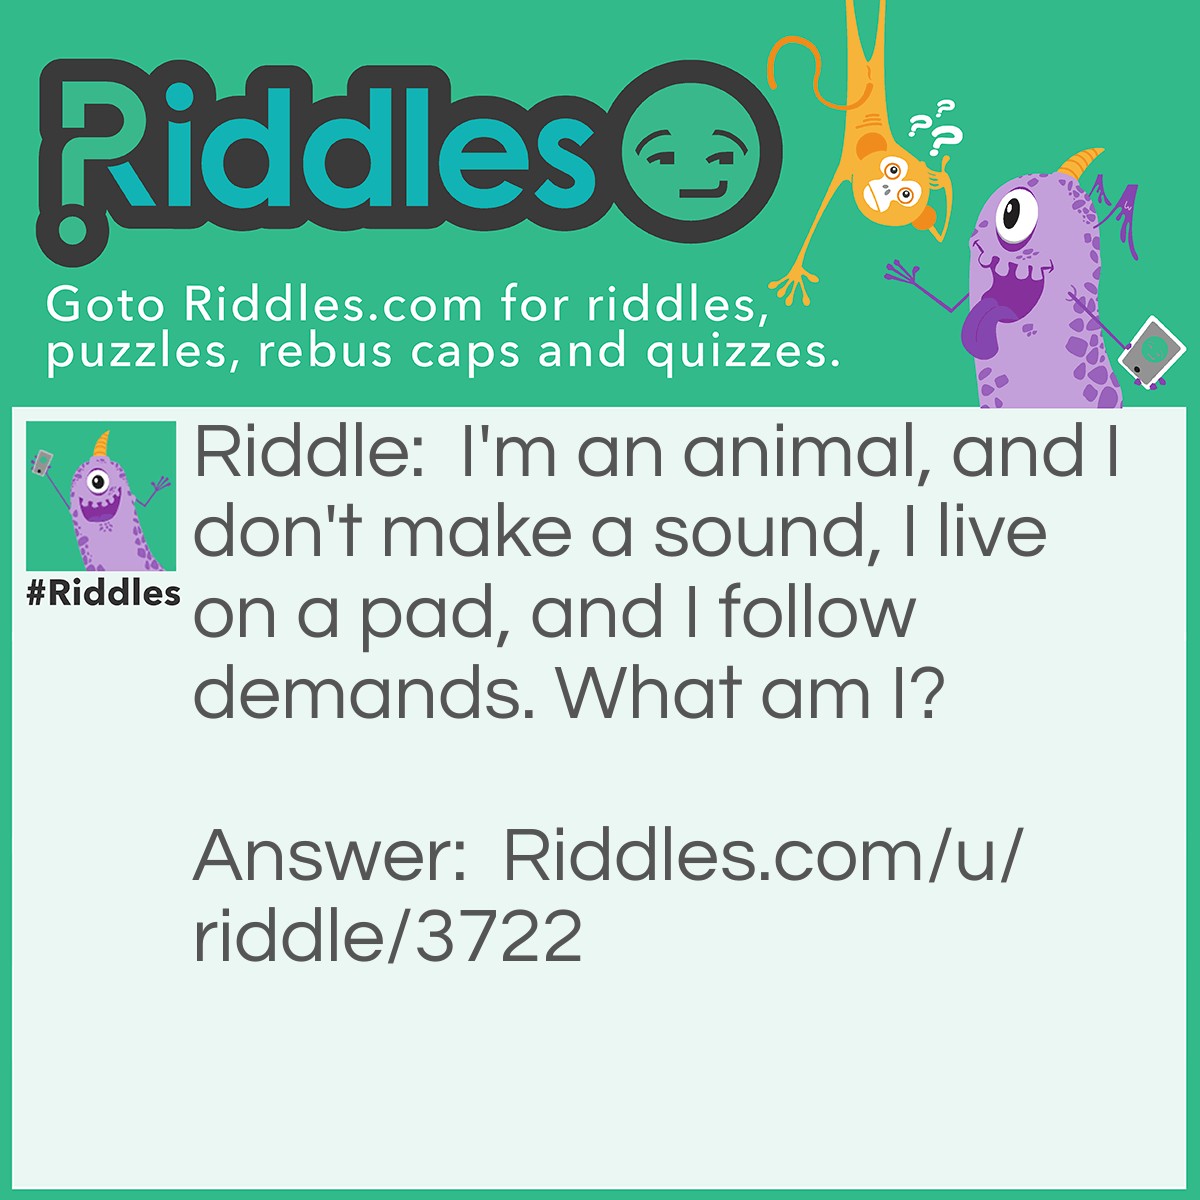 Riddle: I'm an animal, and I don't make a sound, I live on a pad, and I follow demands. What am I? Answer: A mouse (on a computer or an actual mouse).